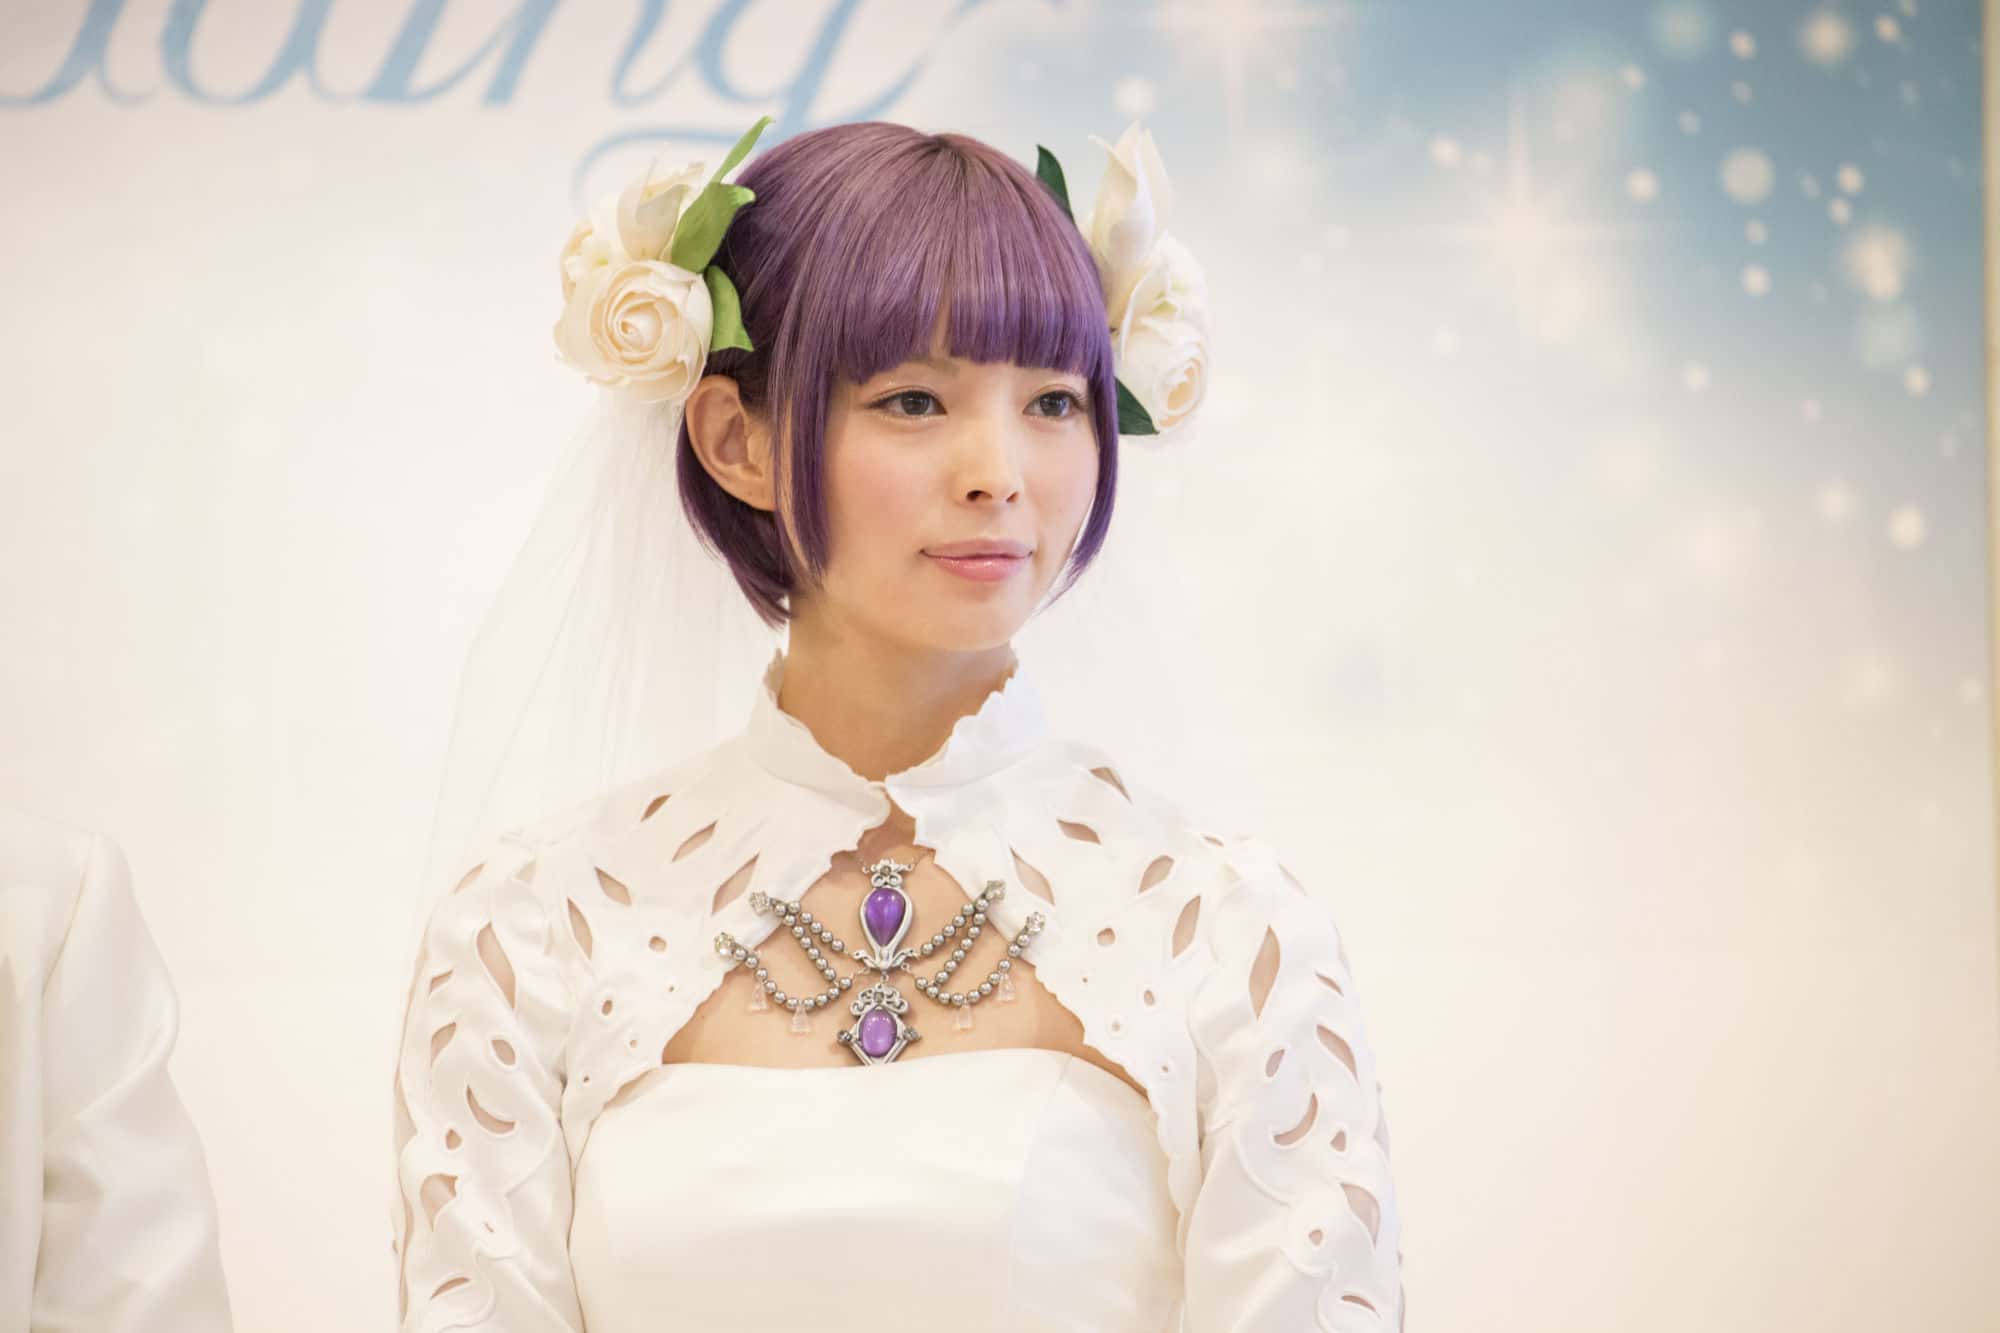 Final Fantasy XIV's Real-Life Wedding Service Comes with Replica Weapons